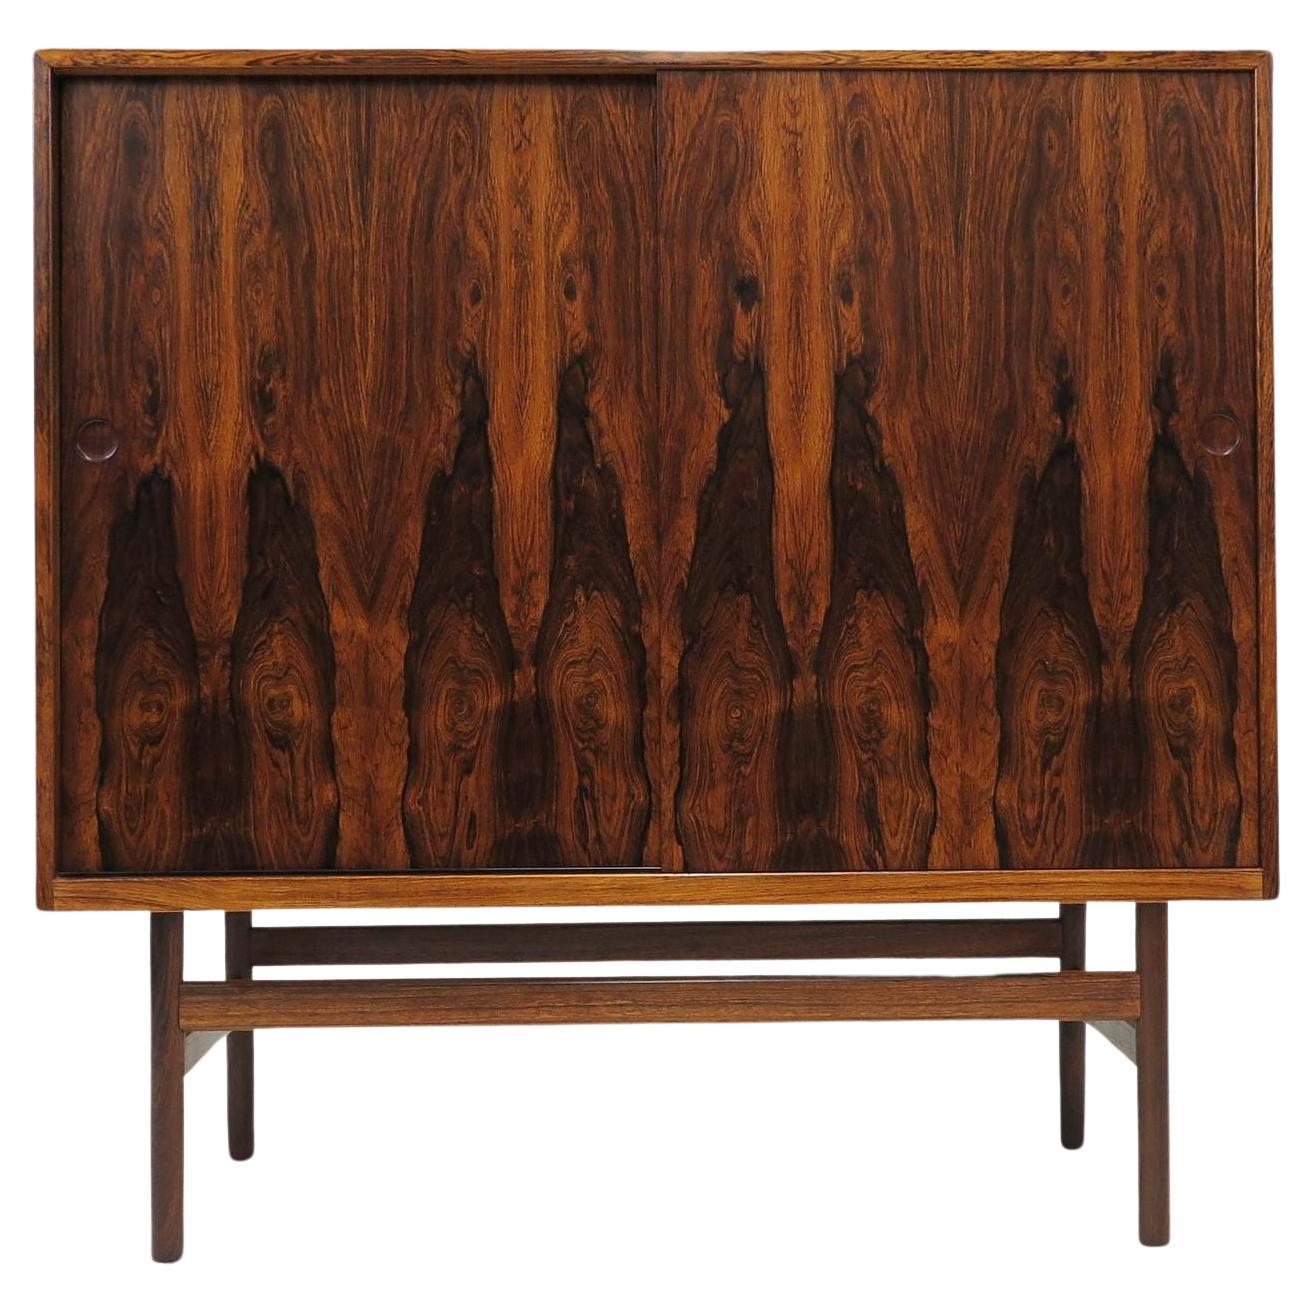 Stunning Rosewood Cabinet with Book-matched Grain For Sale